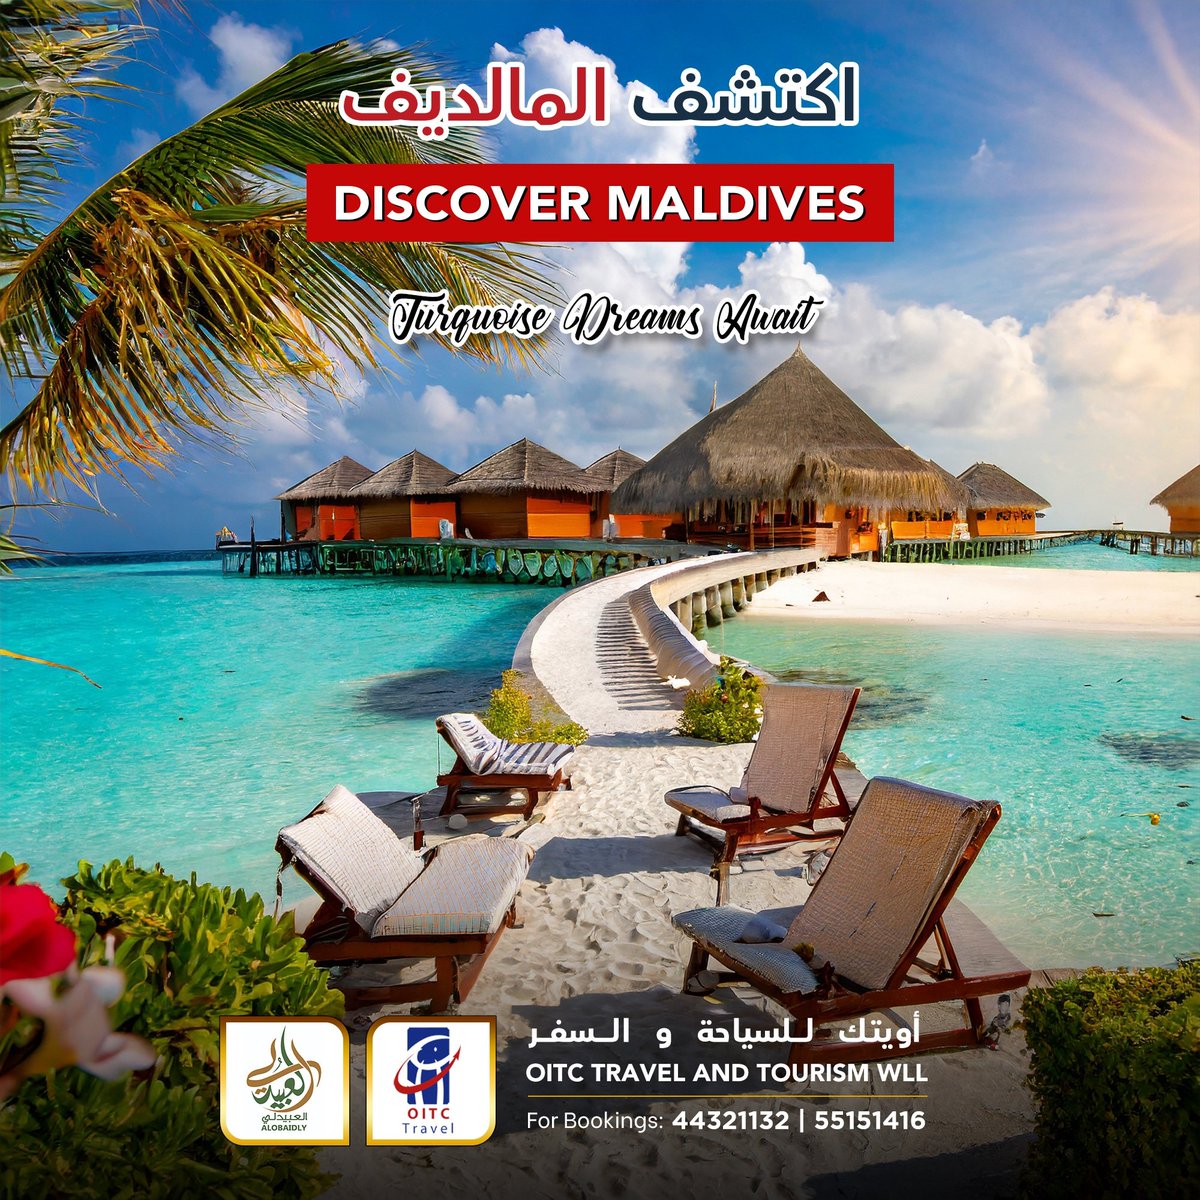 Book your exclusive packages with us !

Discover Maldives with Srilankan Airlines for 3 nights & 4 days! 

 #maldivesadventure #sunsandsea #exploremaldives #wanderlust #islandlife #vacationgoals #travelbliss #diveintoparadise #doha #qatar #oitctravels